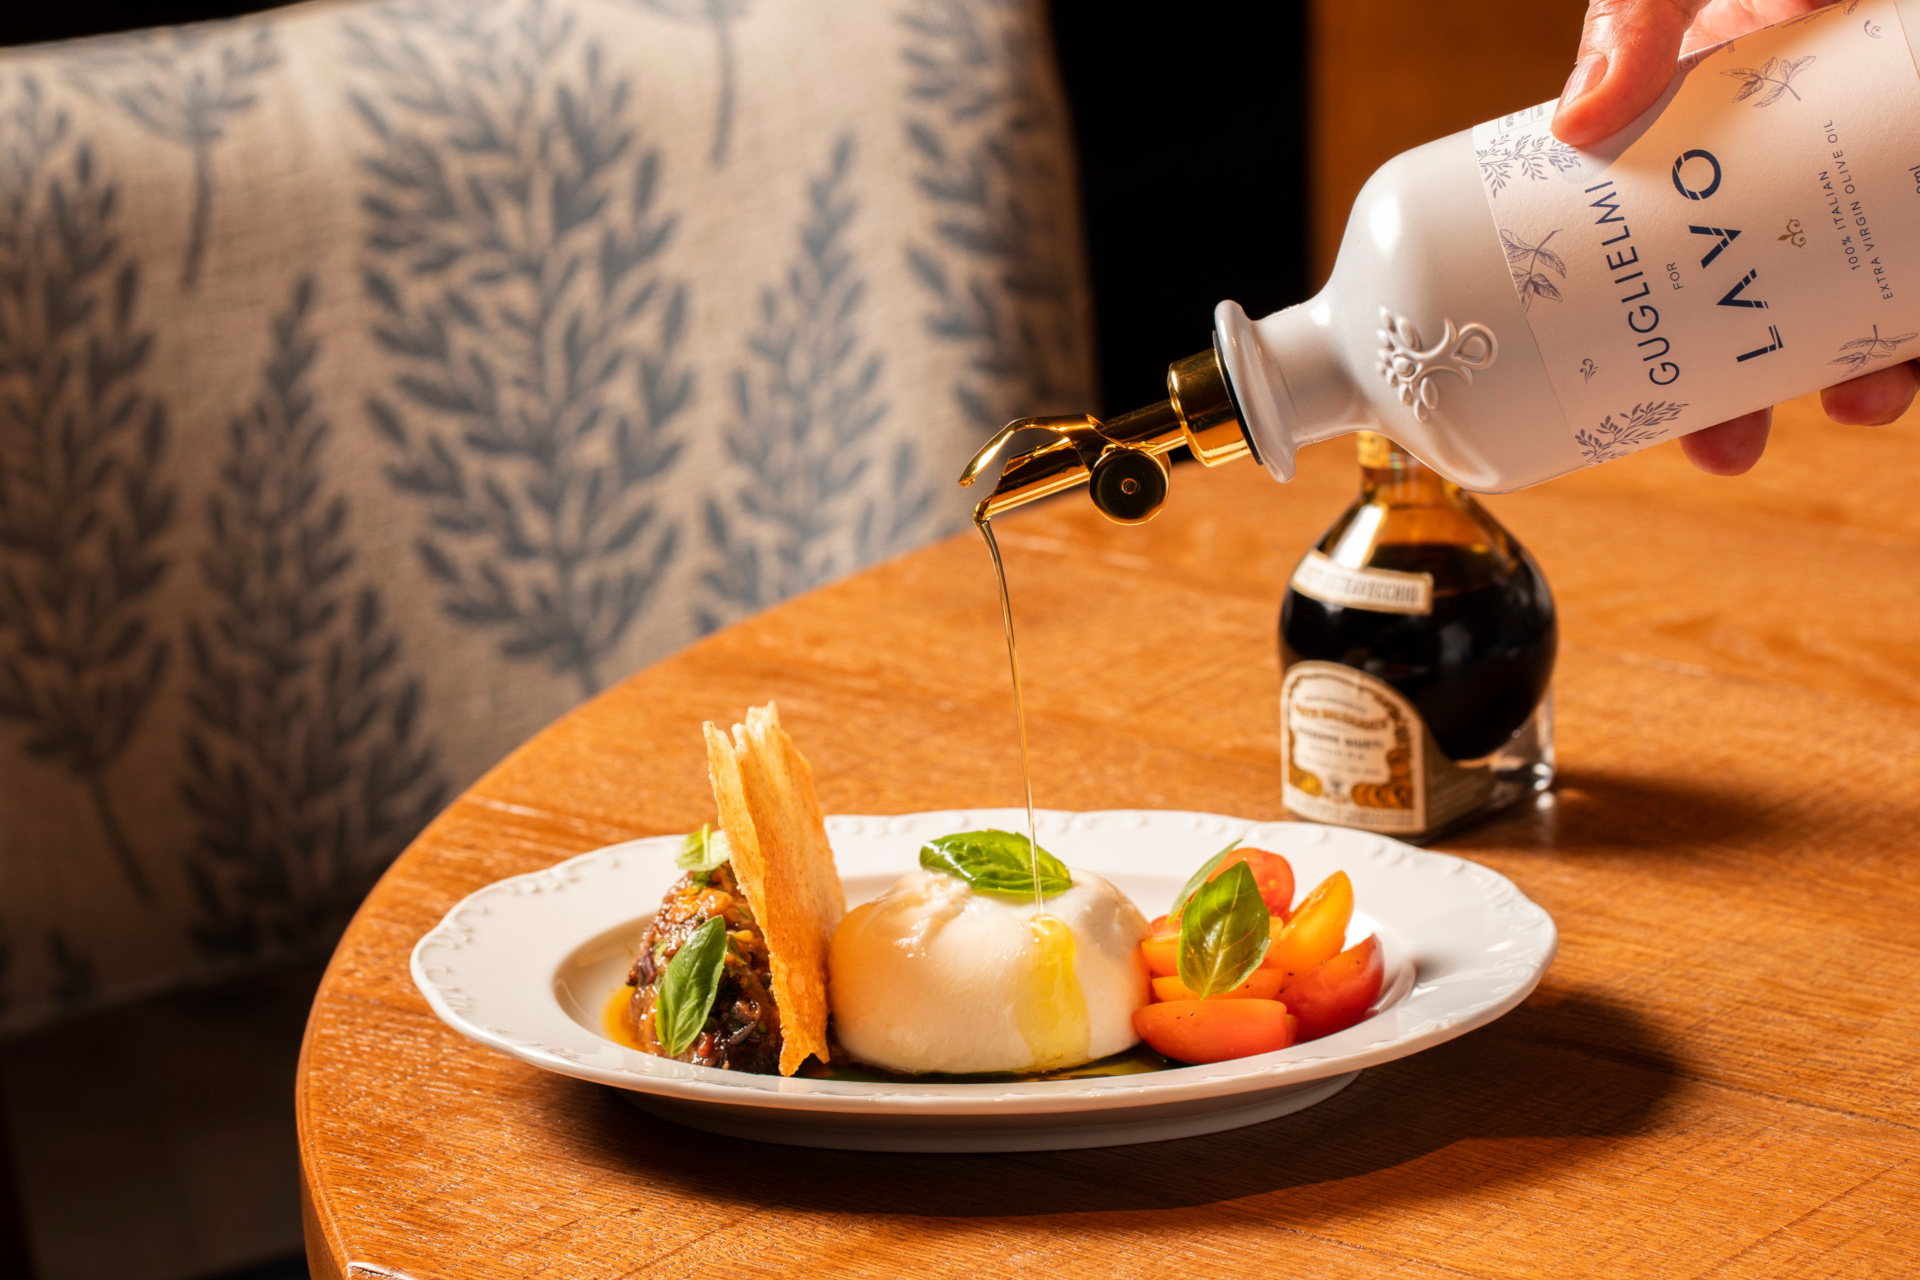 Burrata dish on plate, being drizzled with basil oil